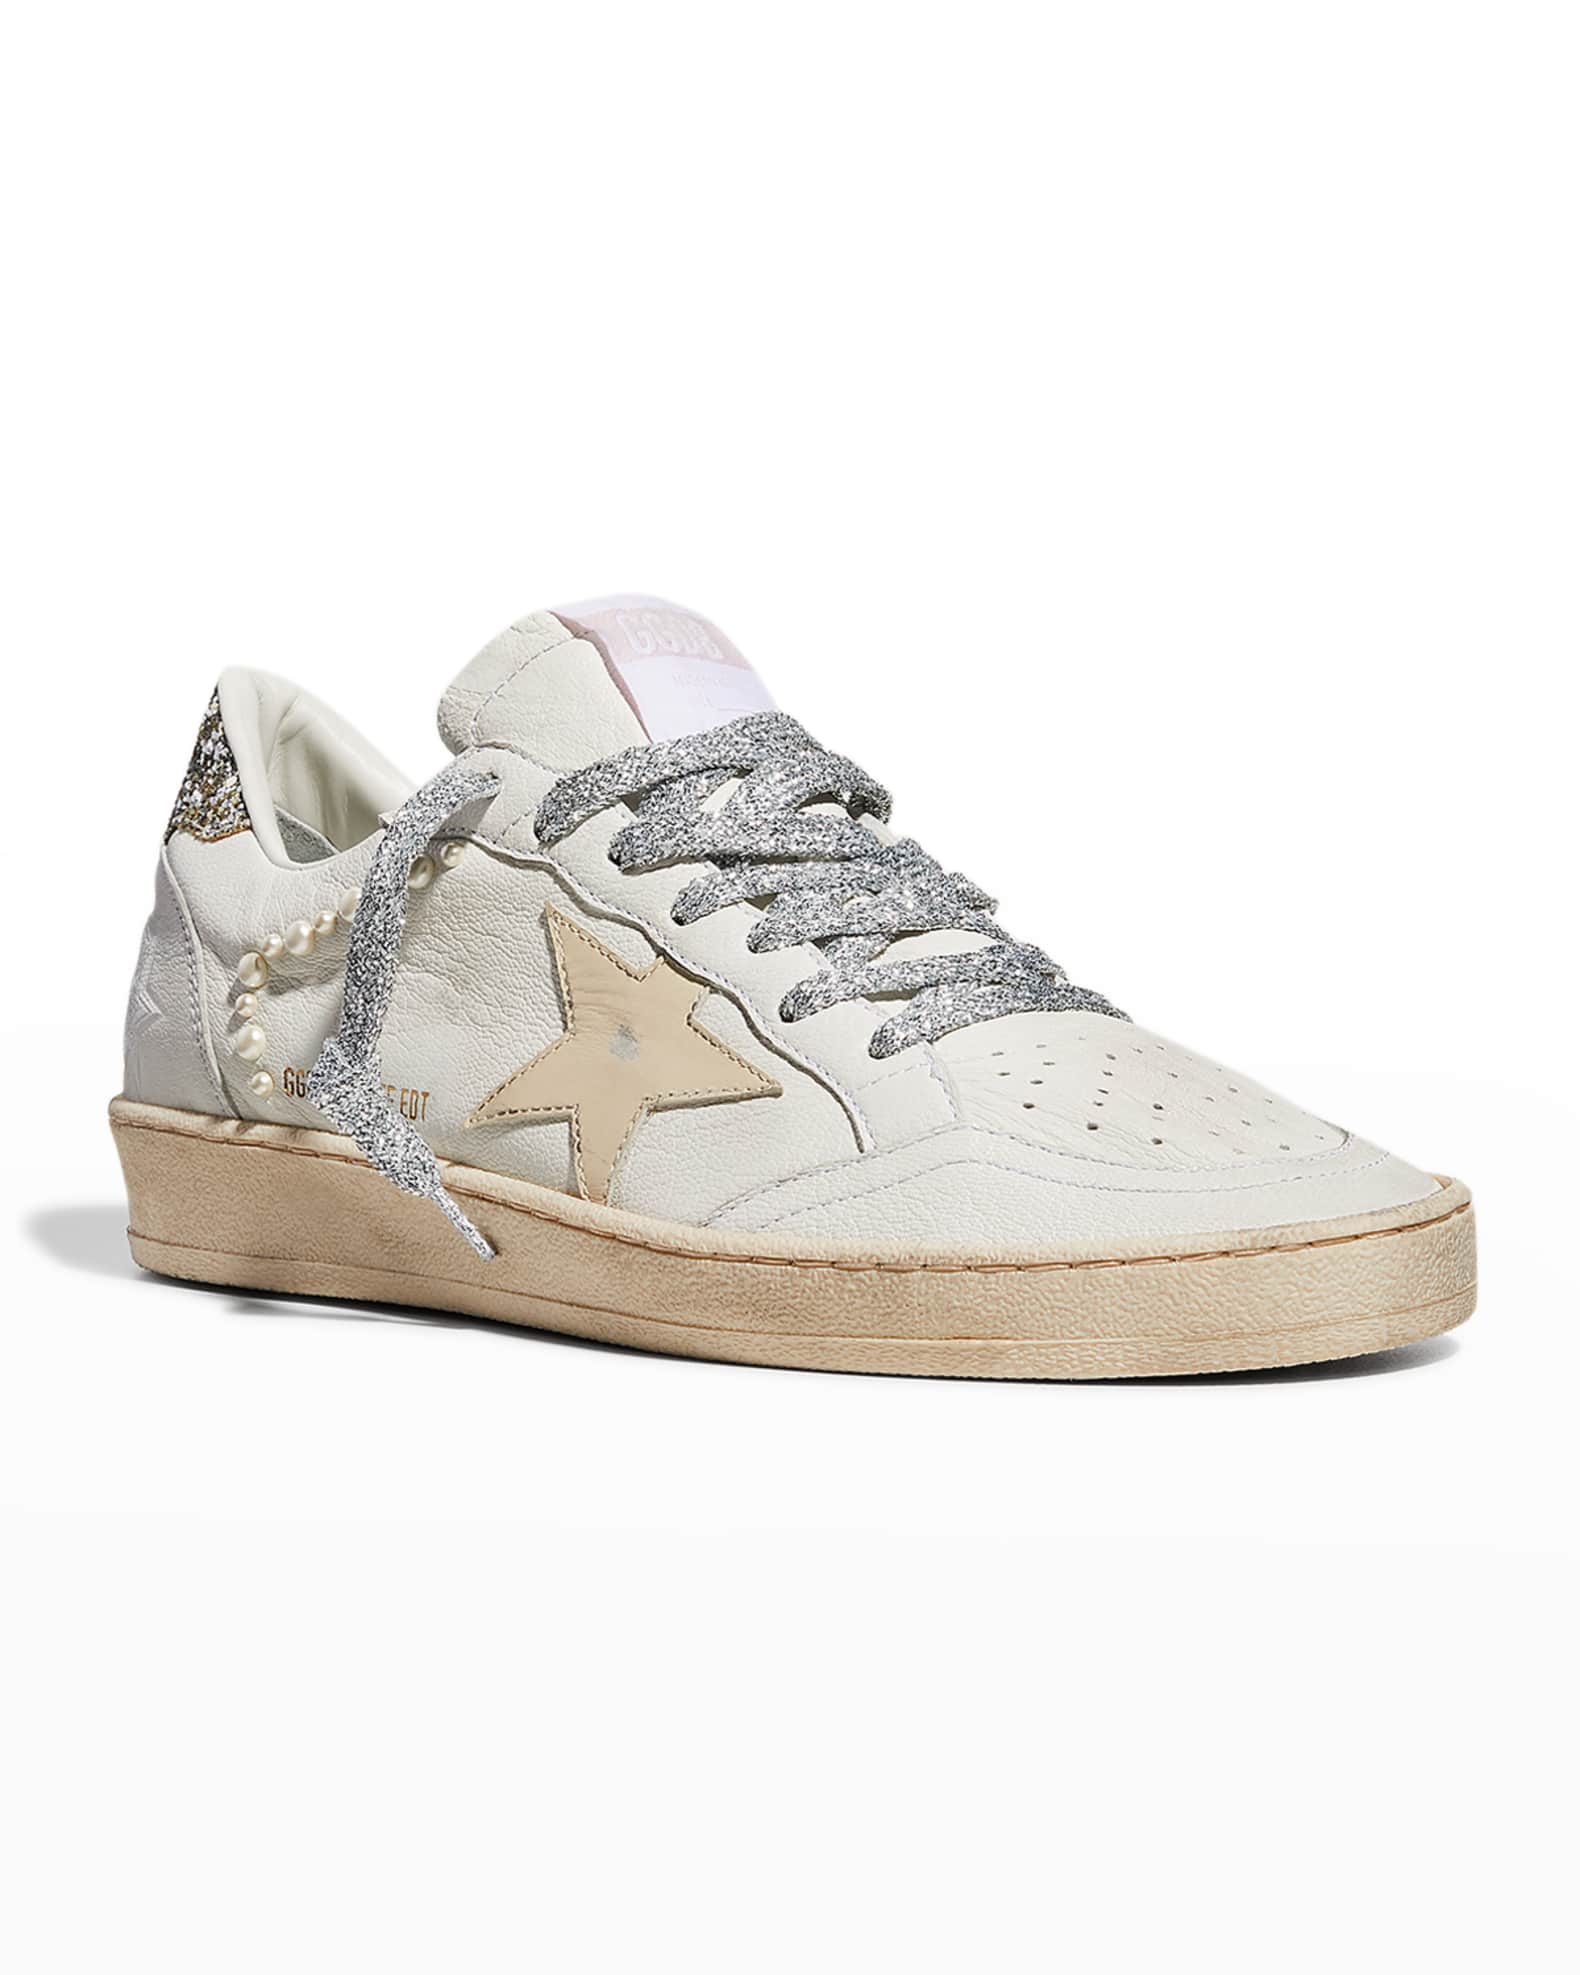 Golden Goose Ballstar Pearly Leather Glitter Sneakers | Neiman Marcus